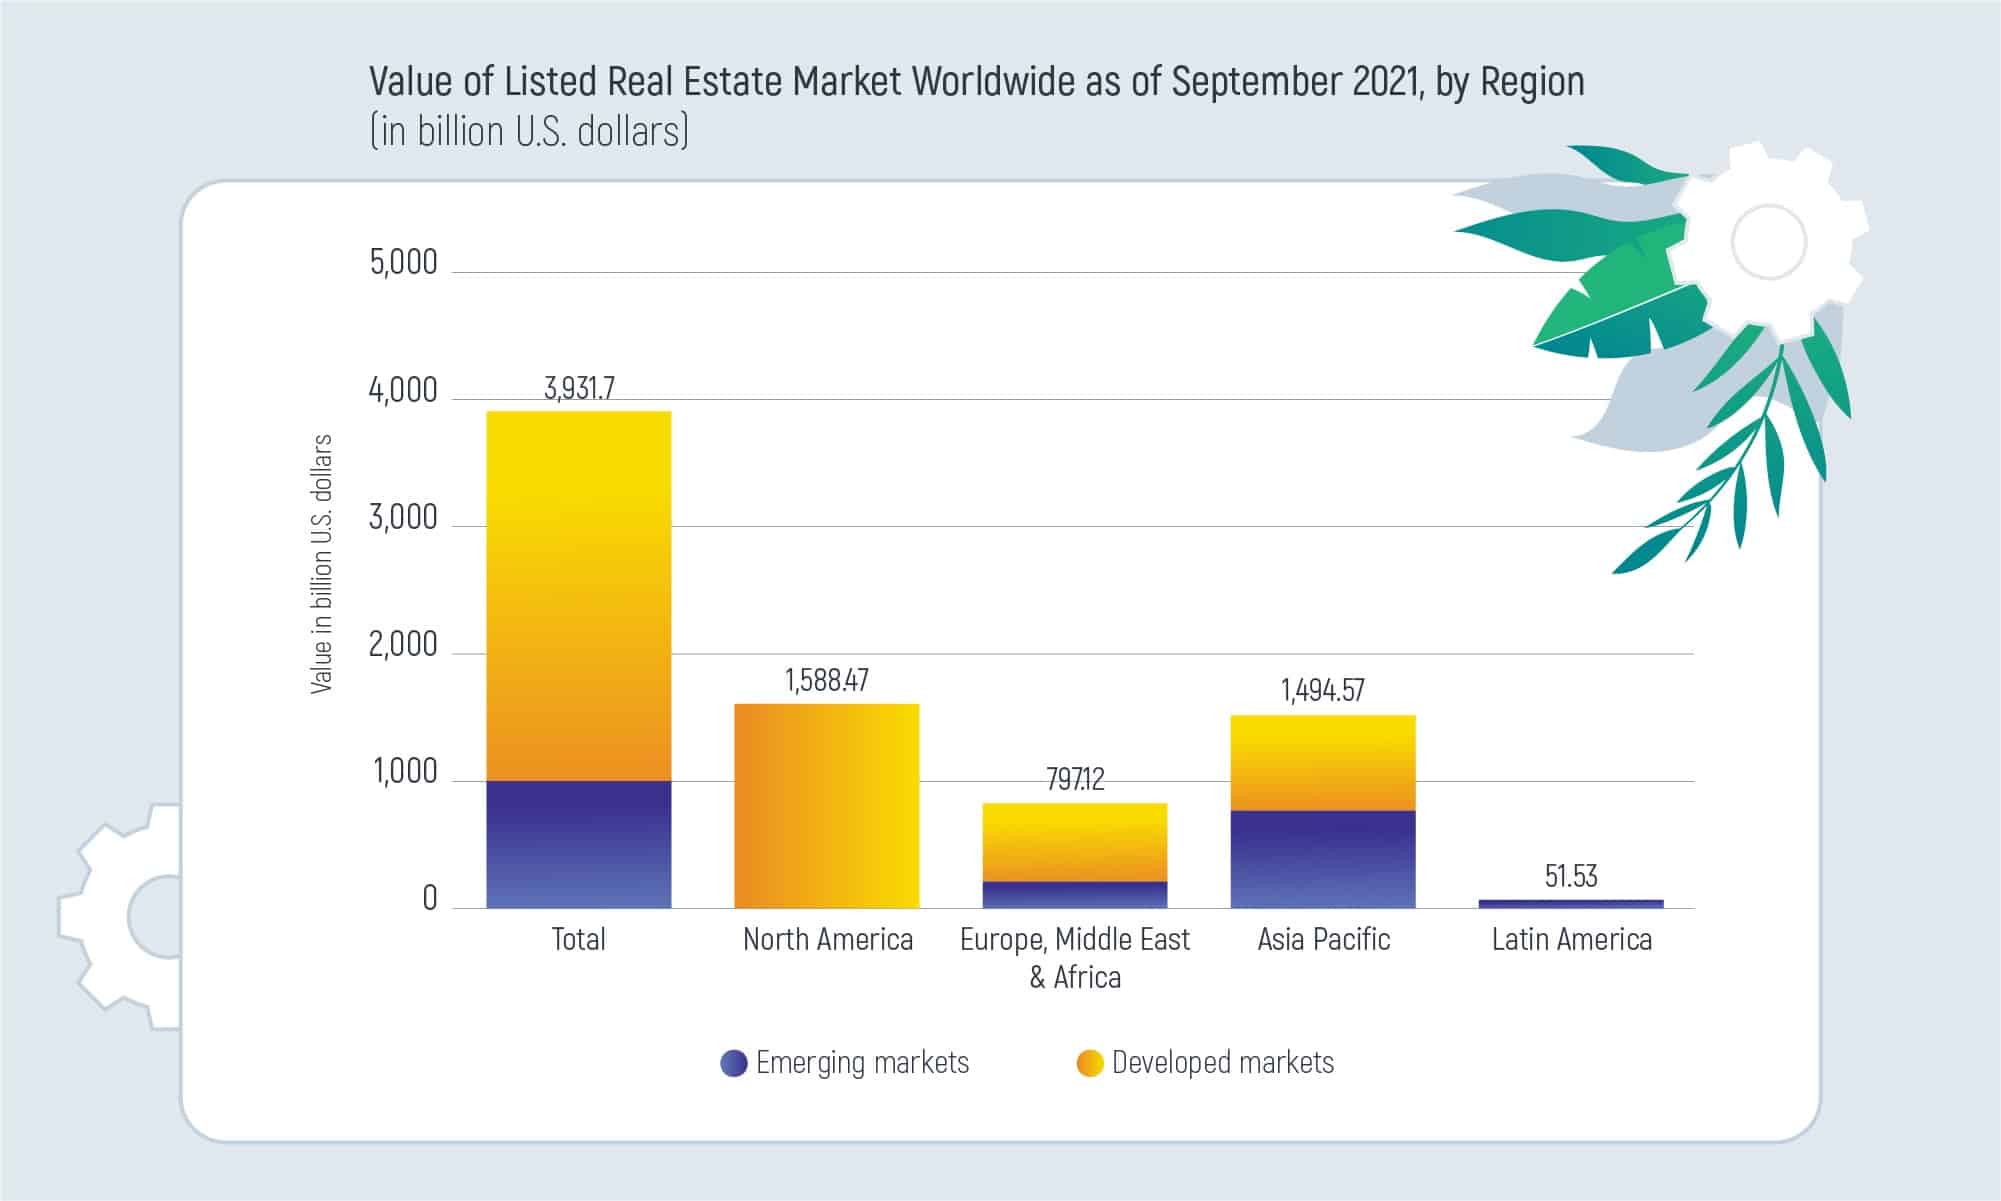 Value of Listed Real Estate Market Worldwide as of September 2021, by Region